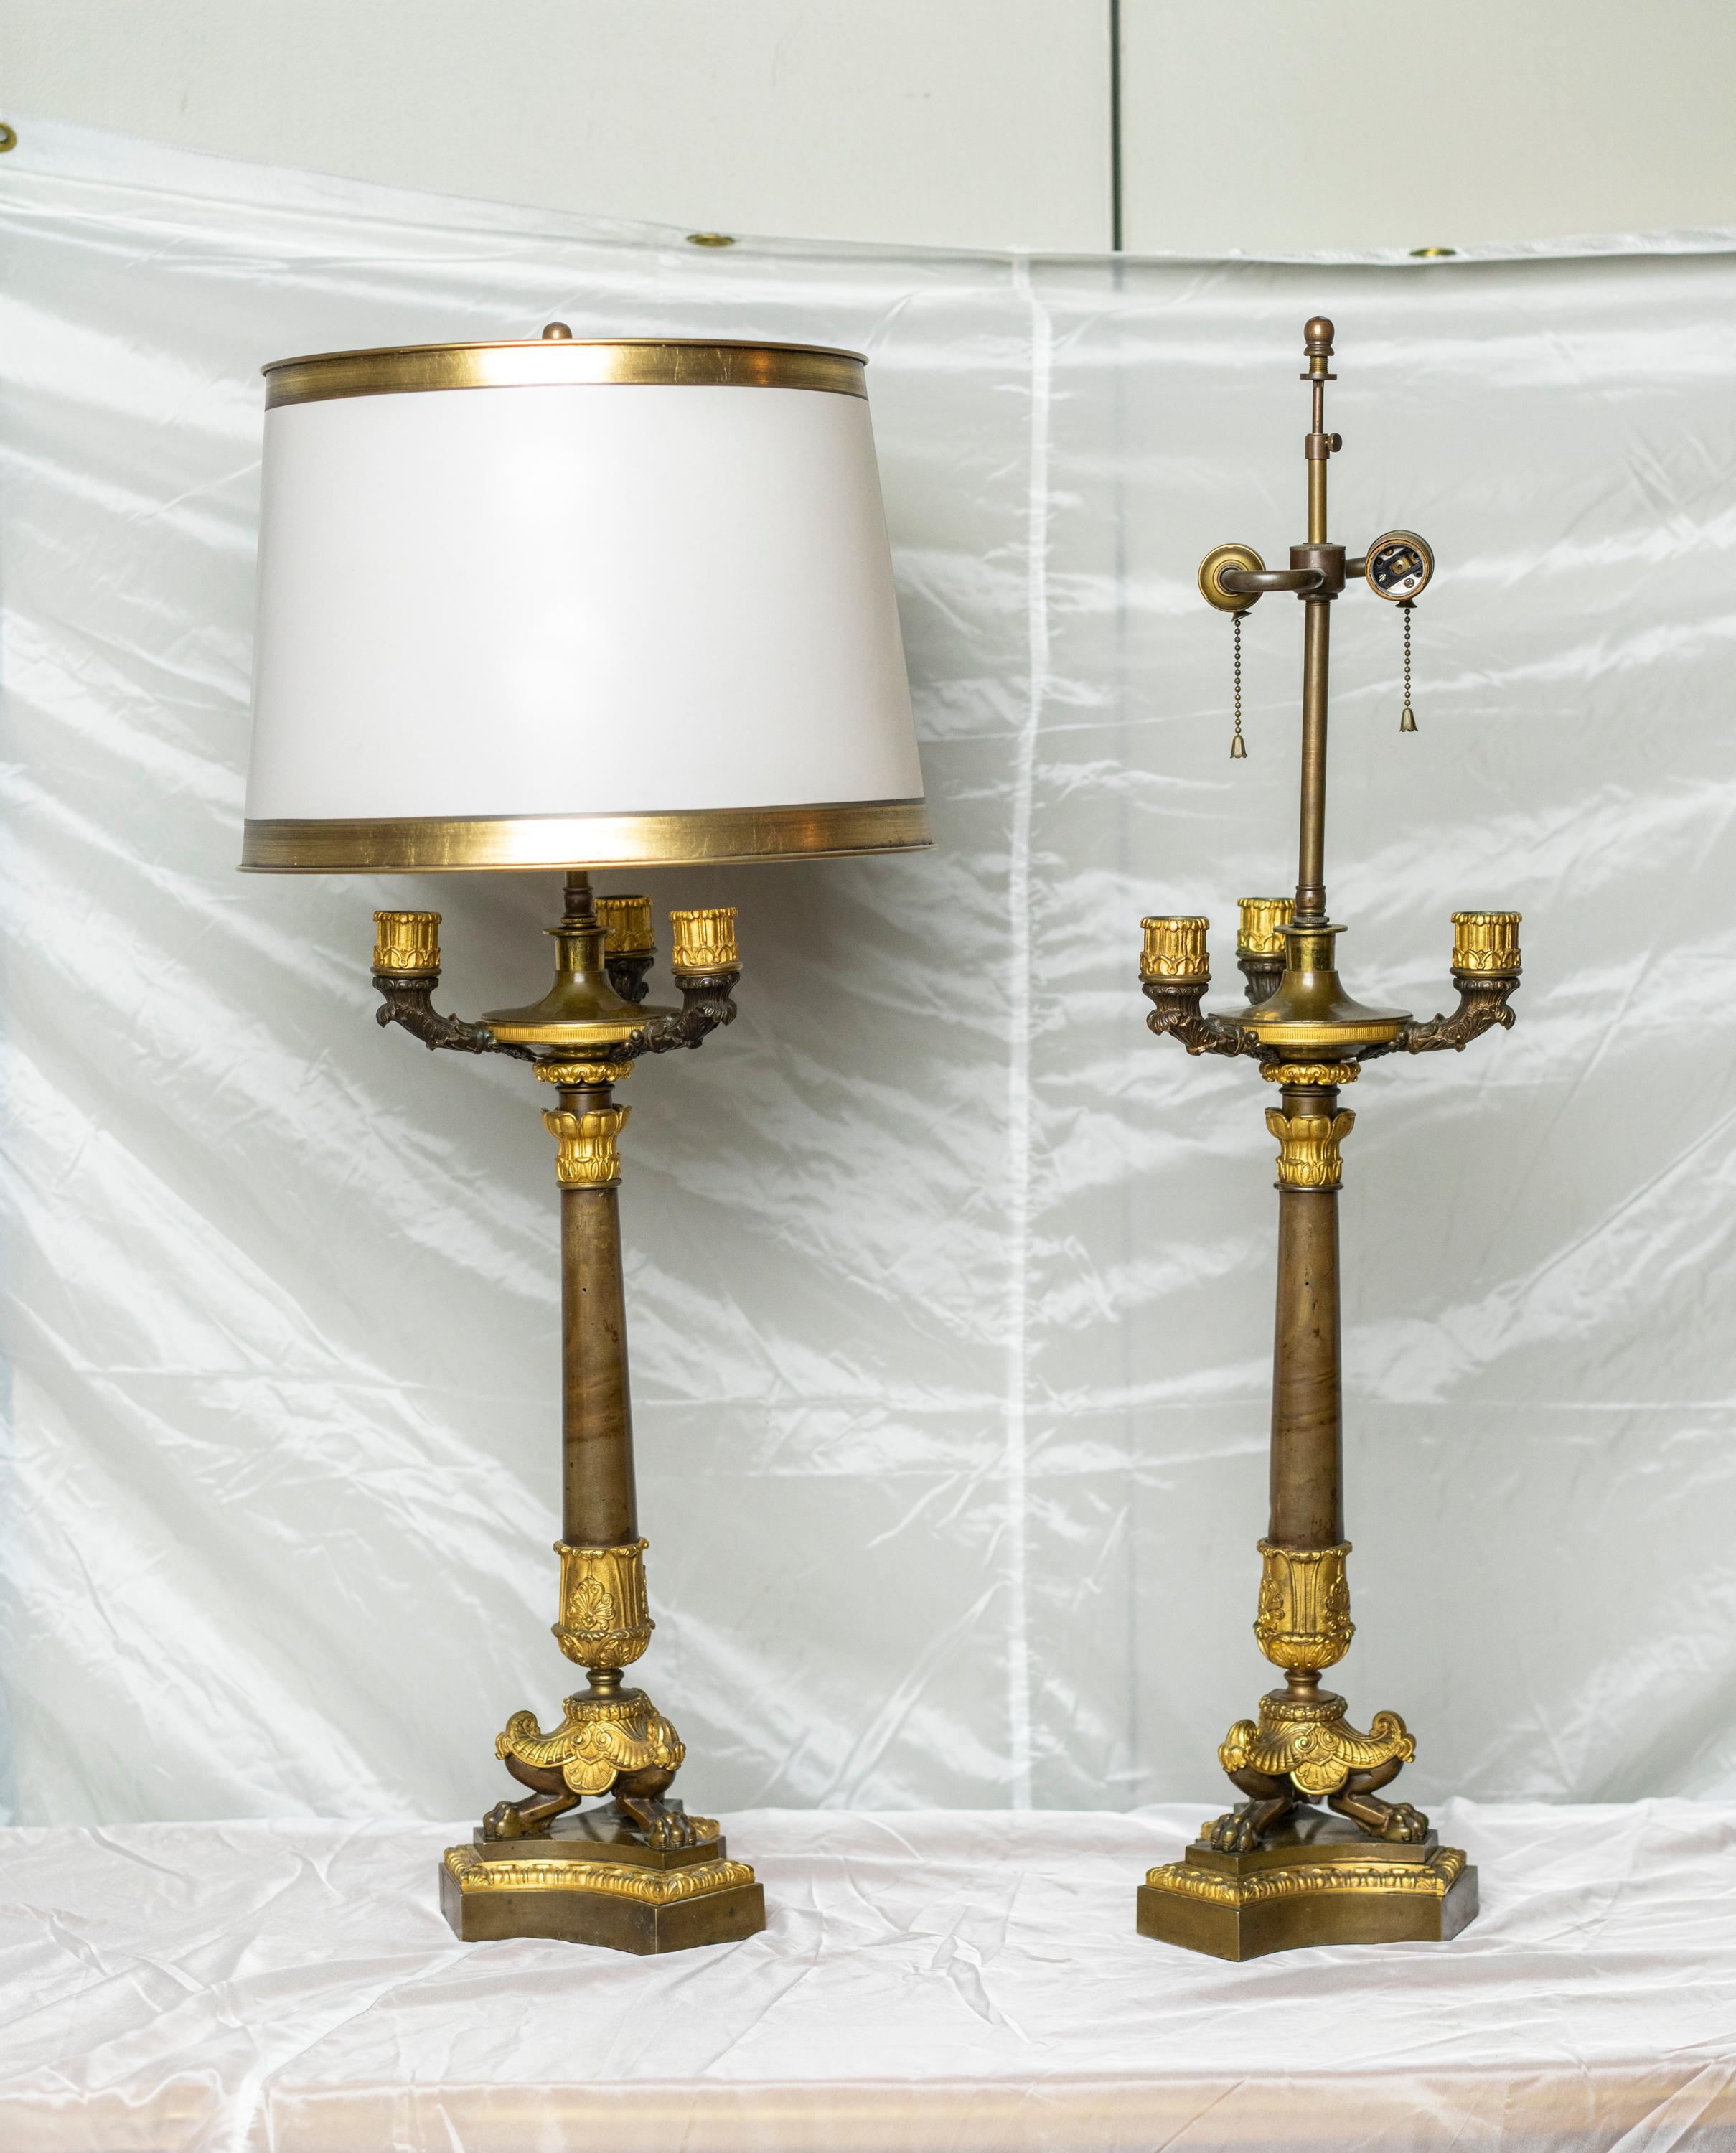 Pair of gilt and patinated bronze Restauration period candelabra lamps
The upper part in antique urn, the arms with acanthus leaves, resting on a tripod base with claw feet surmounted by palmettes.